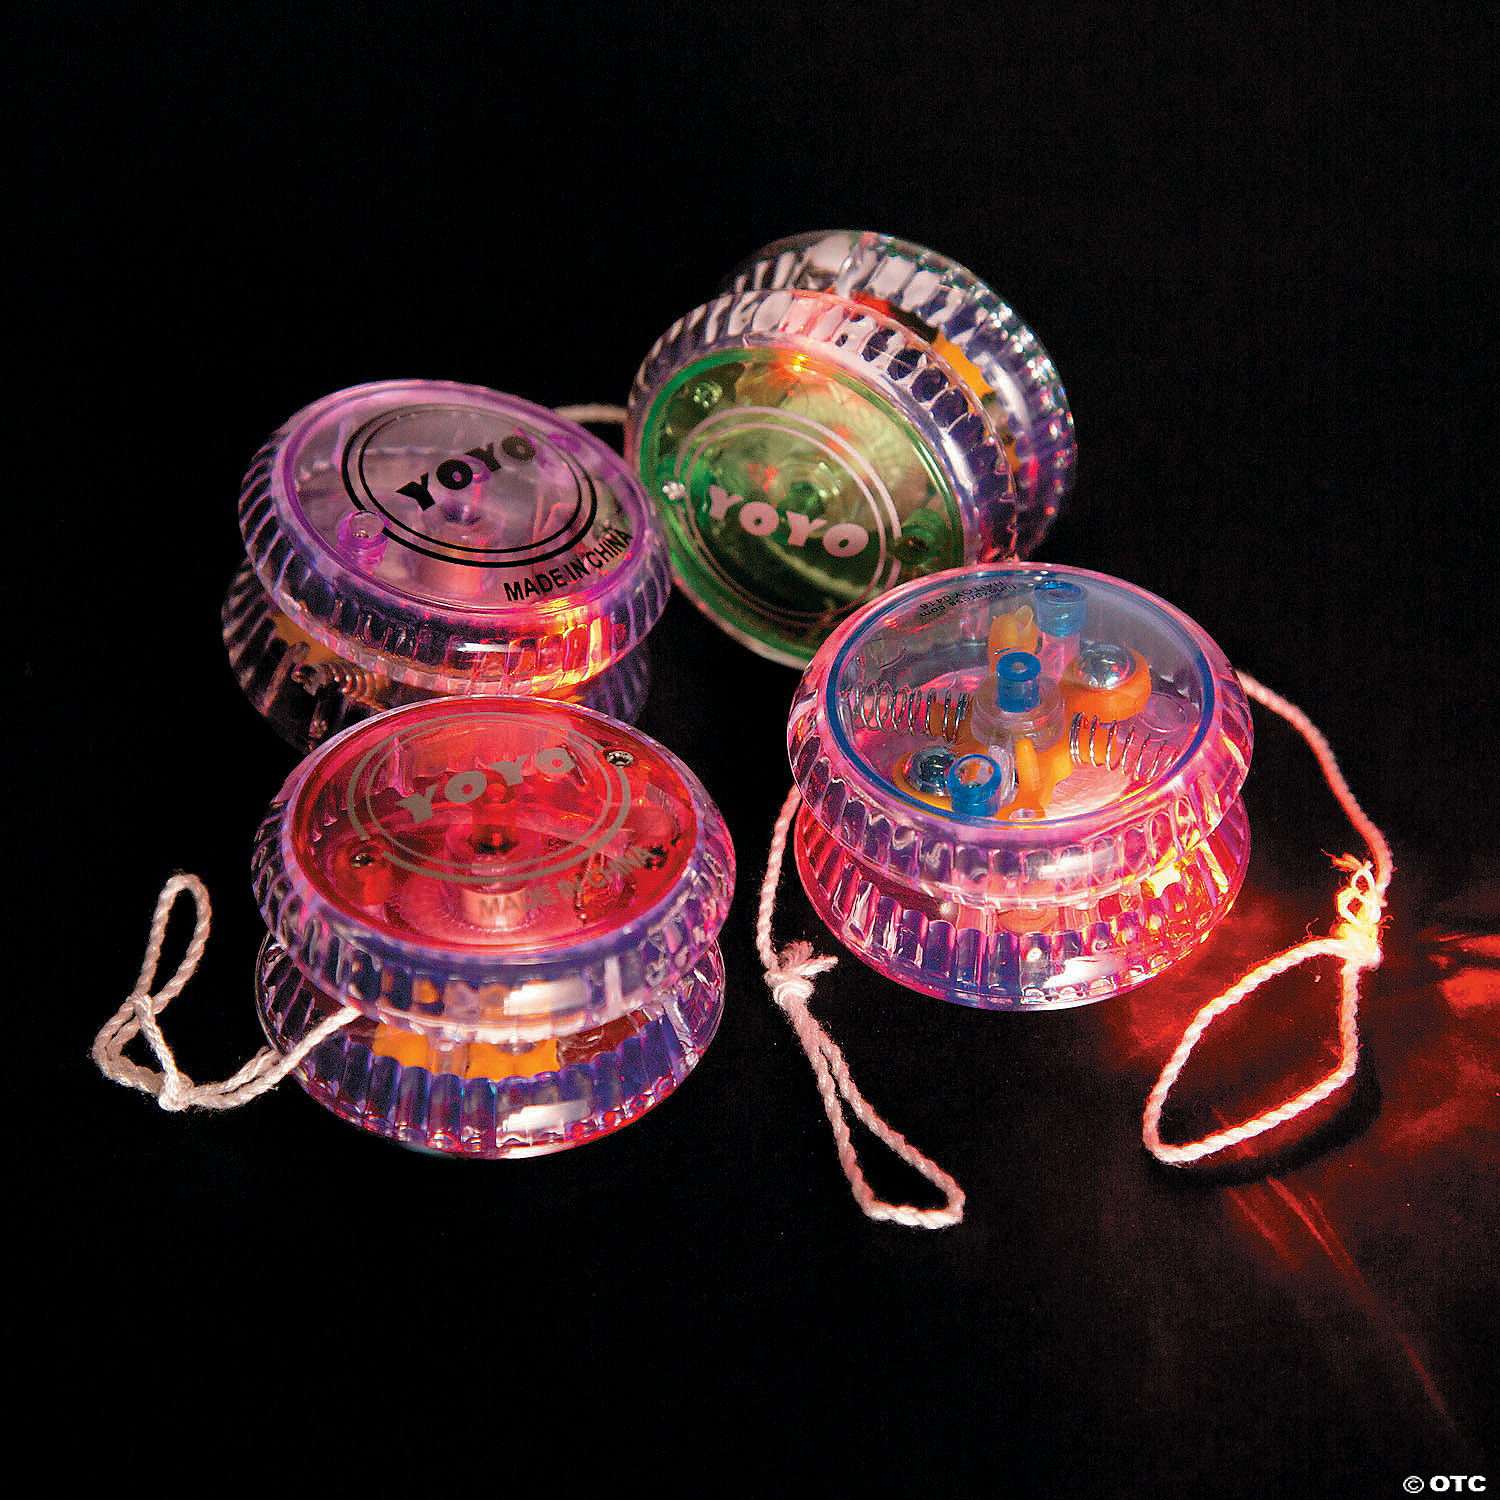 https://openaparty.com/open-a-party-shop/images/light-up-champion-yoyos-12-pc-~13689407.jpg